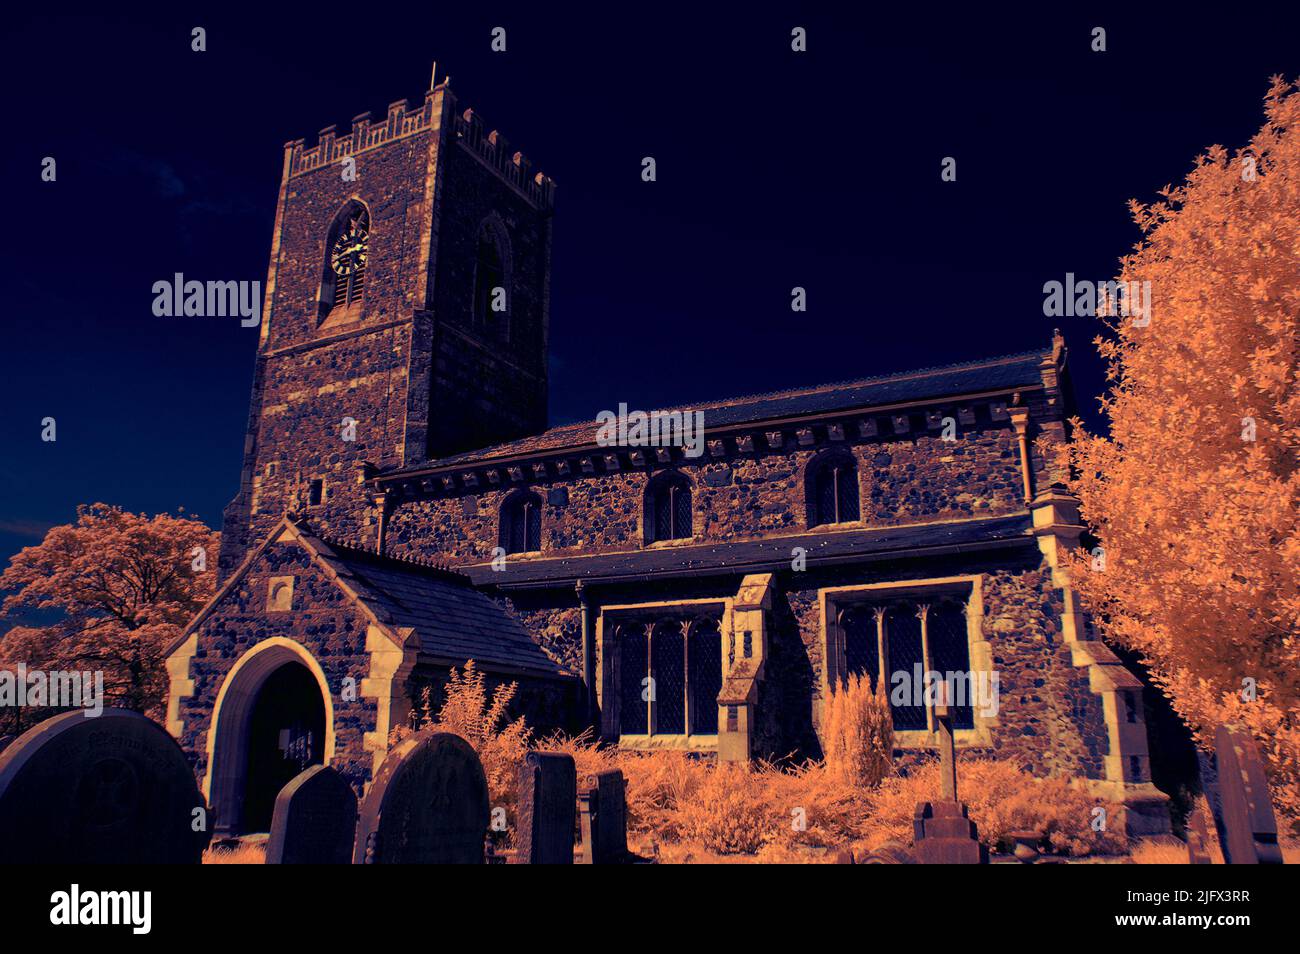 St Nicholas church in Coastal resort of Withernsea East Yorkshire uk taken in infrared Stock Photo